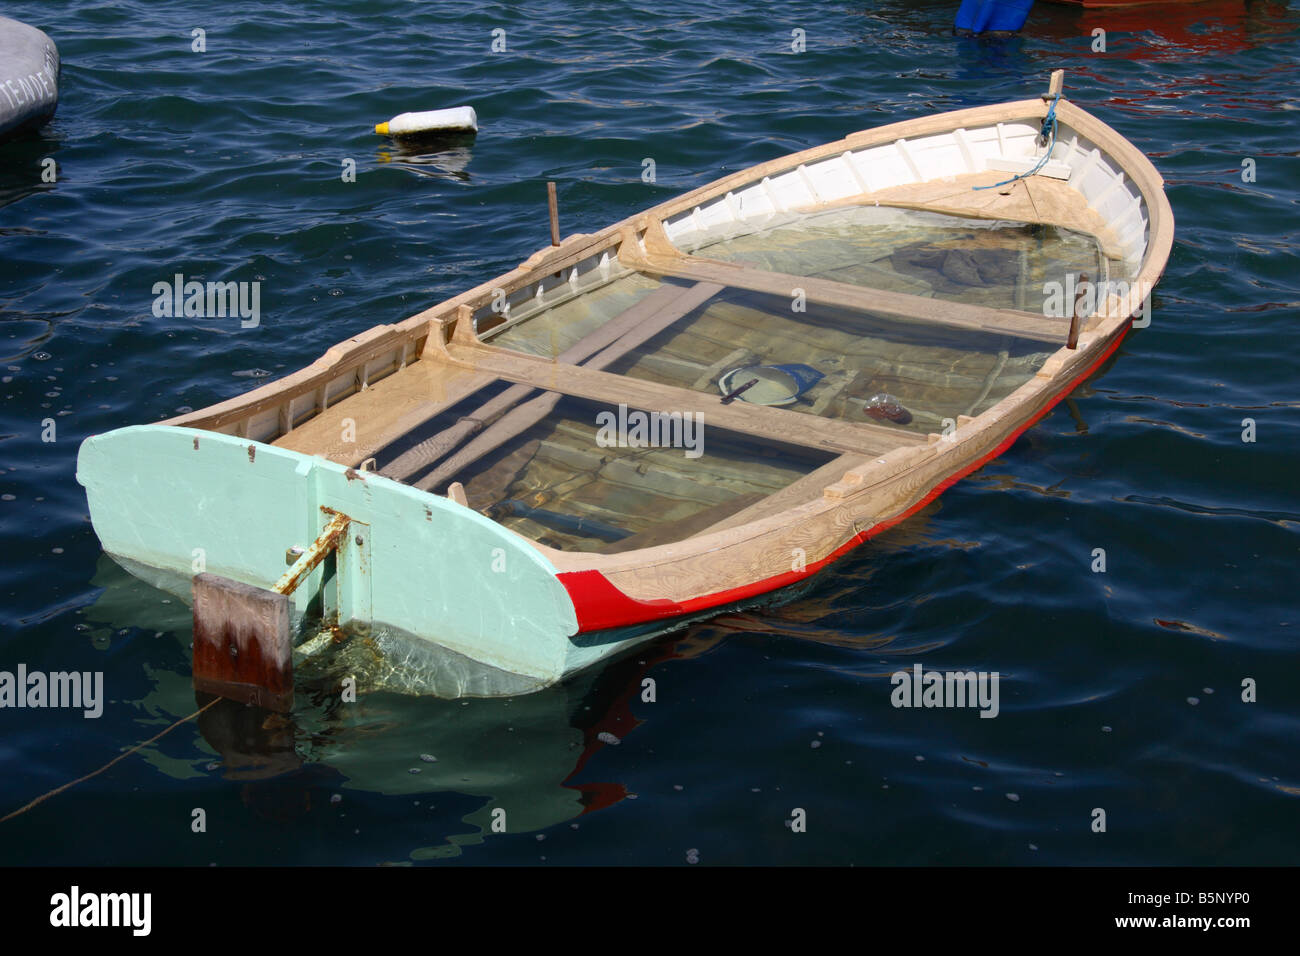 A sinking boat. Stock Photo